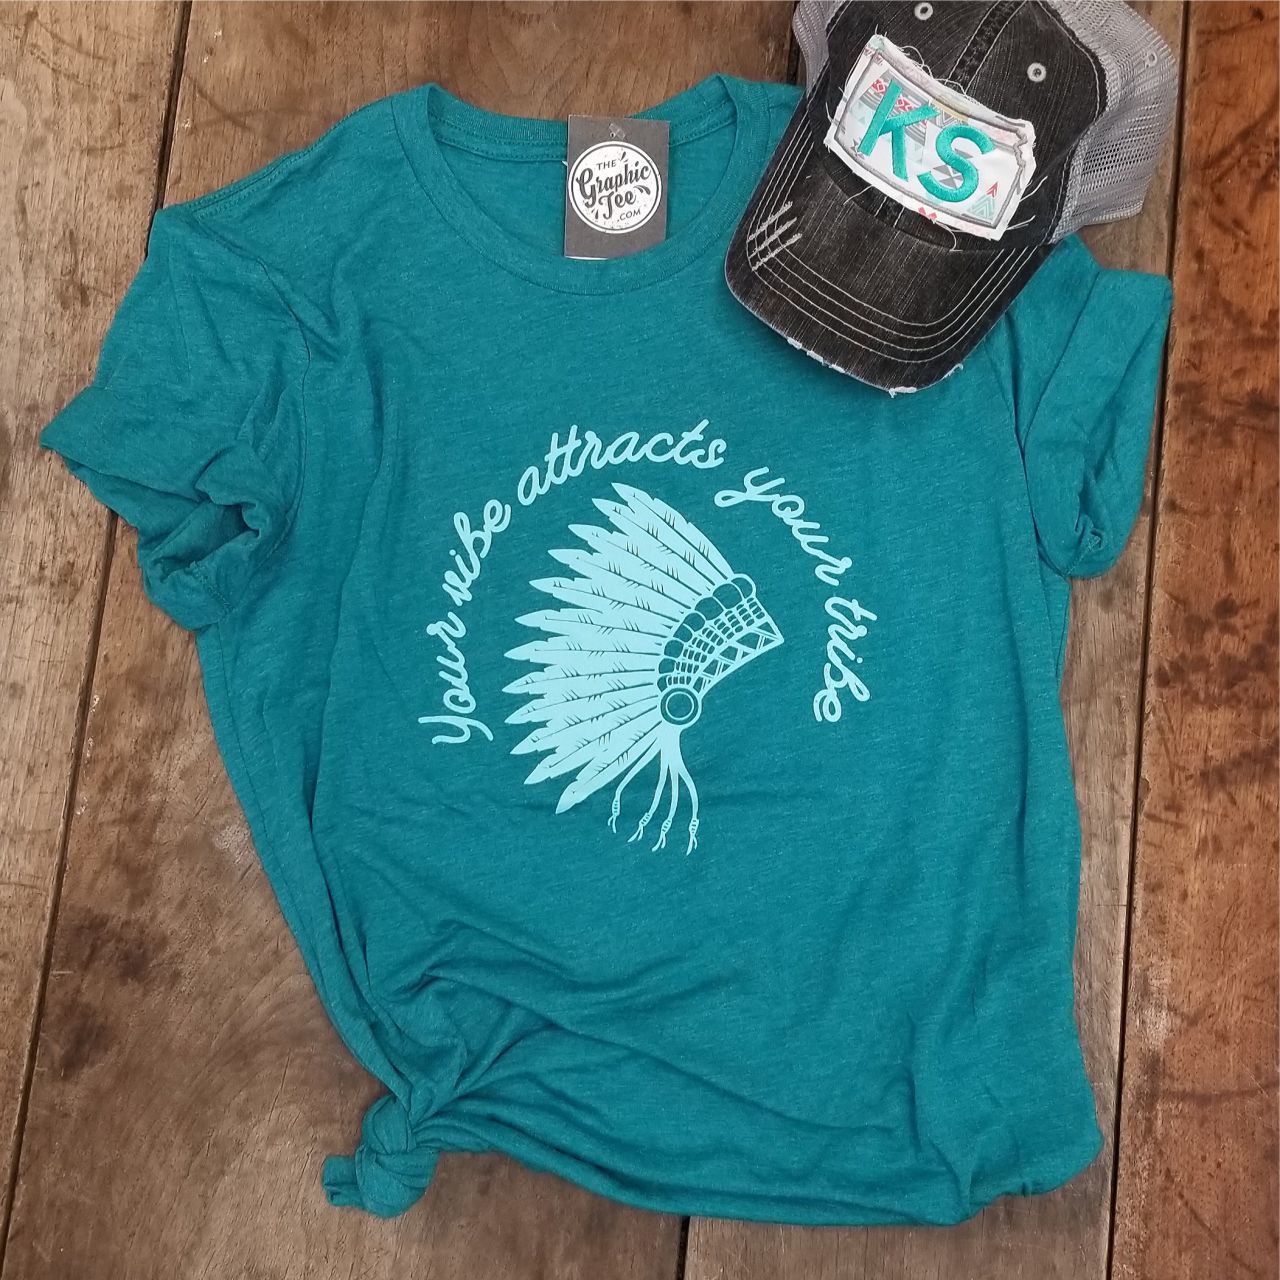 Your Vibe Attracts Your Tribe - Teal Tee - The Graphic Tee